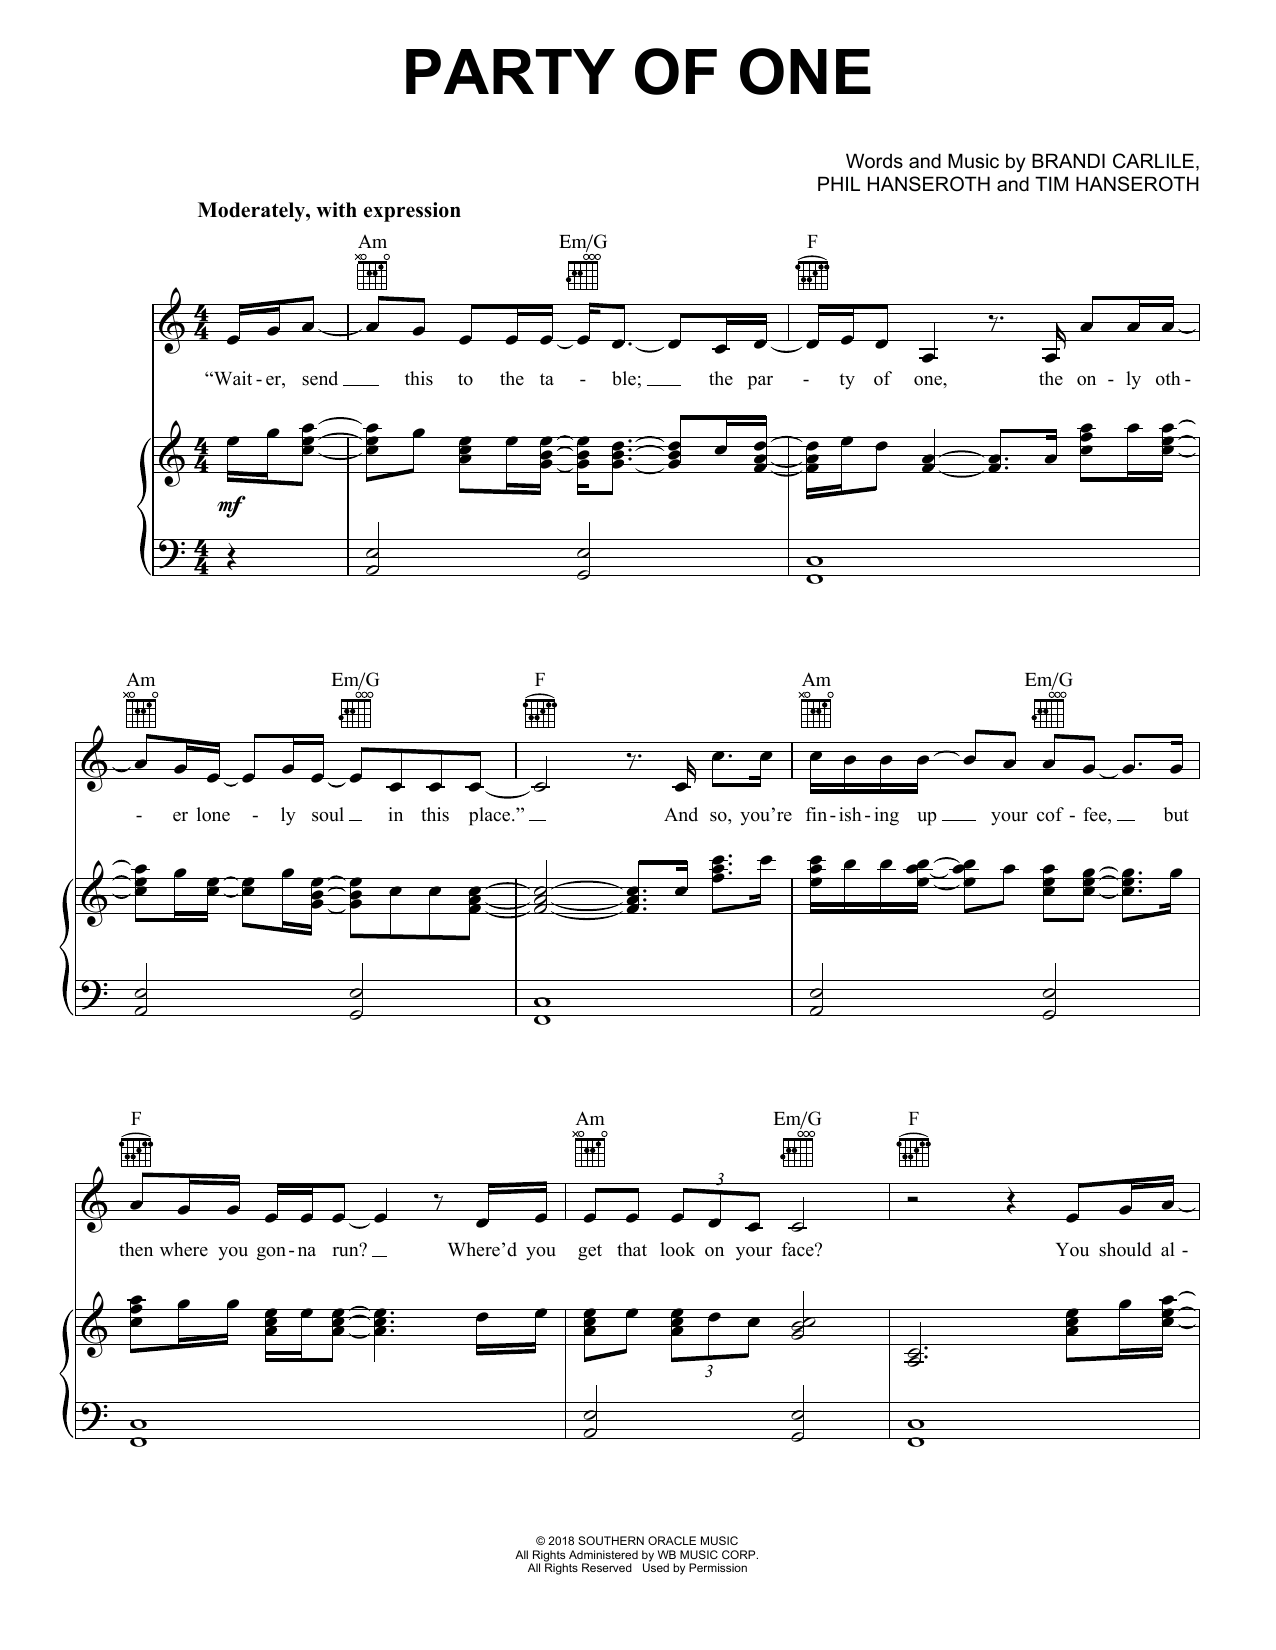 Download Brandi Carlile Party Of One (feat. Sam Smith) Sheet Music